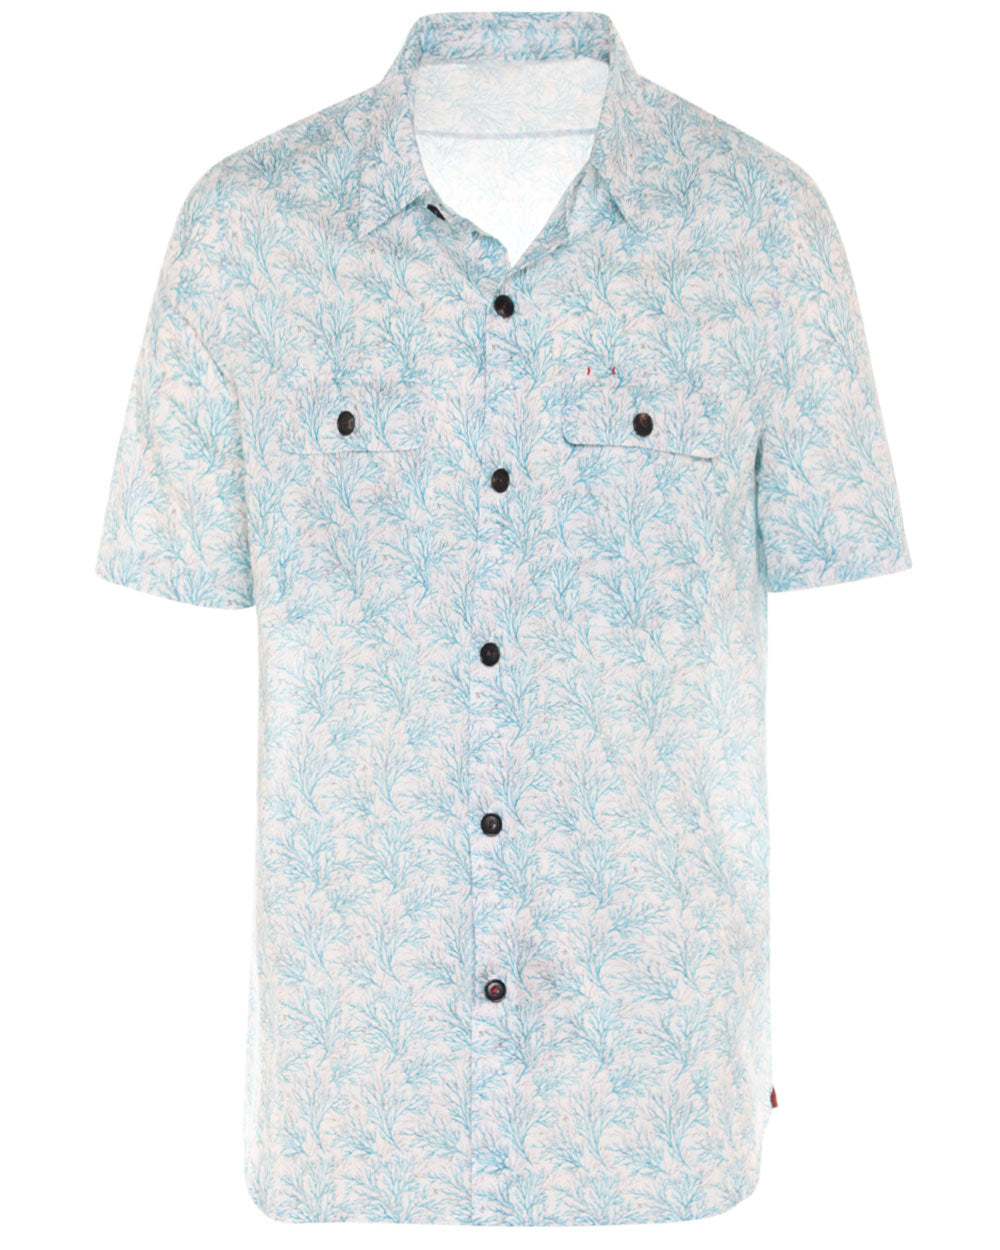 White and Turquoise Coral Print Cotton Short Sleeve Sportshirt